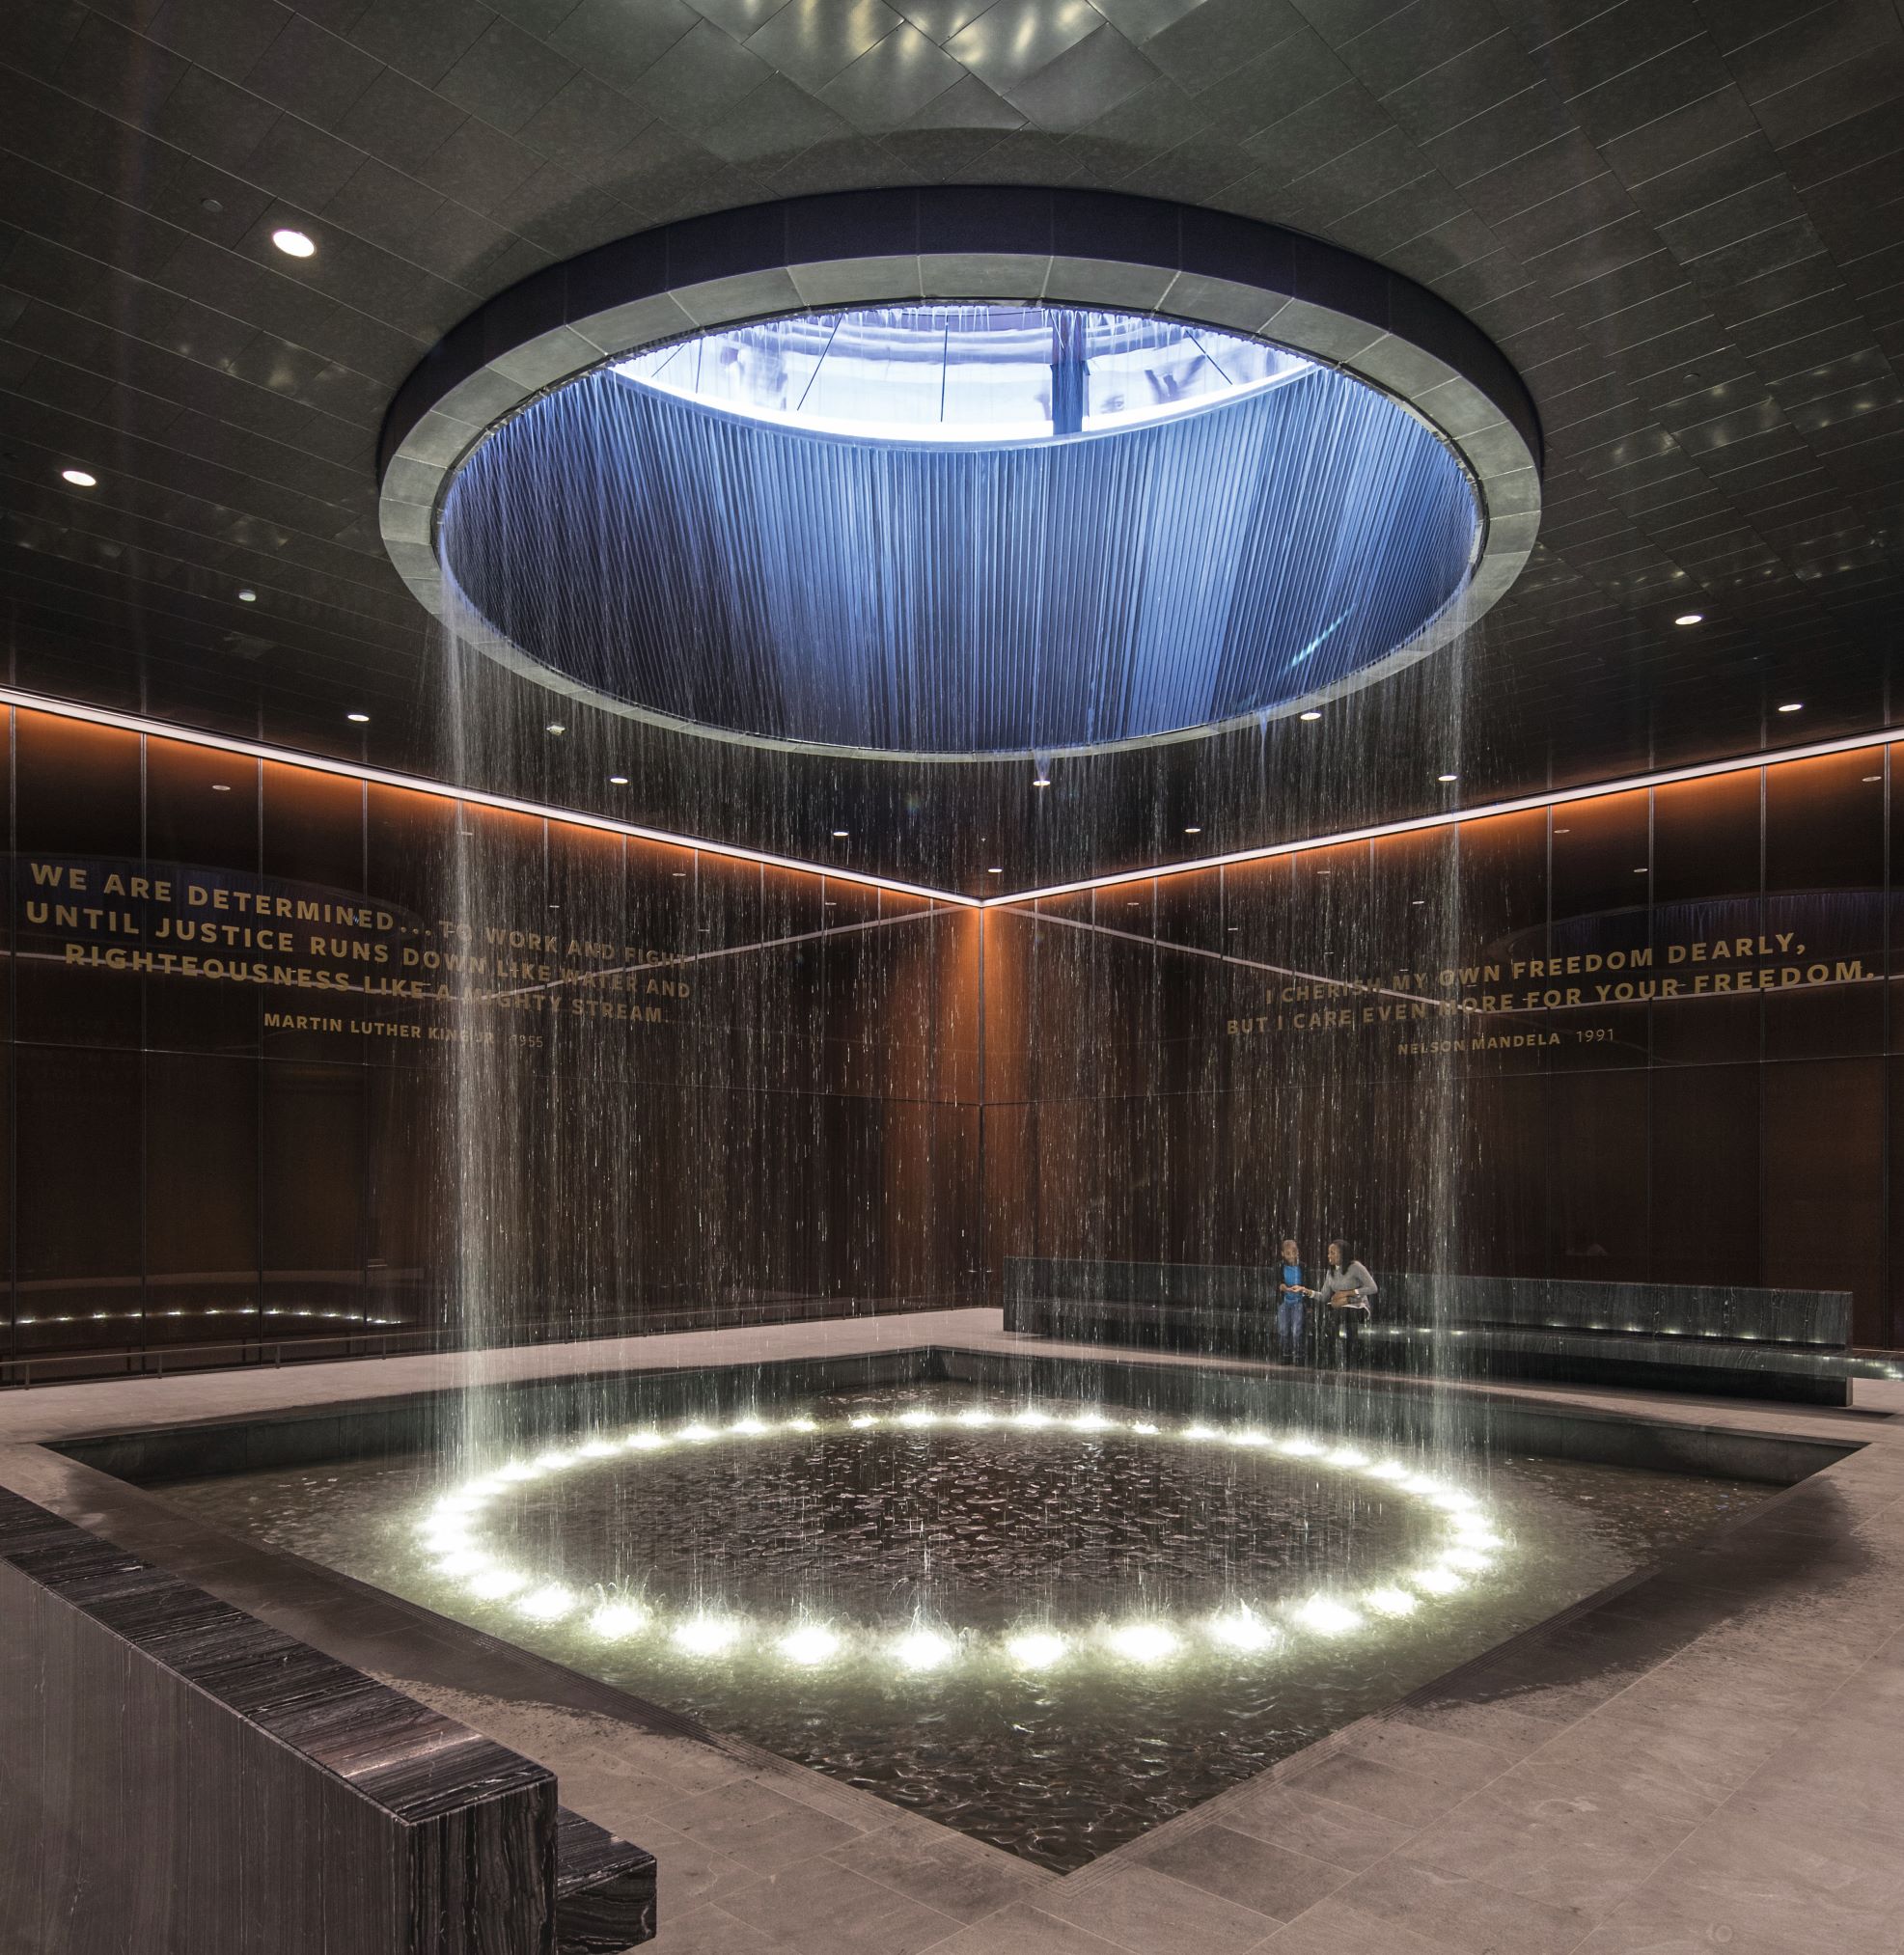 Smithsonian National Museum of African American History and Culture, Washington, D.C., USA. Freelon Adjaye Bond/SmithGroup (2016). Image courtesy of OTTO. The NMAAHC’s “Contemplative Court” features a meditative cylindrical fountain that rains into a pool in the center of the room